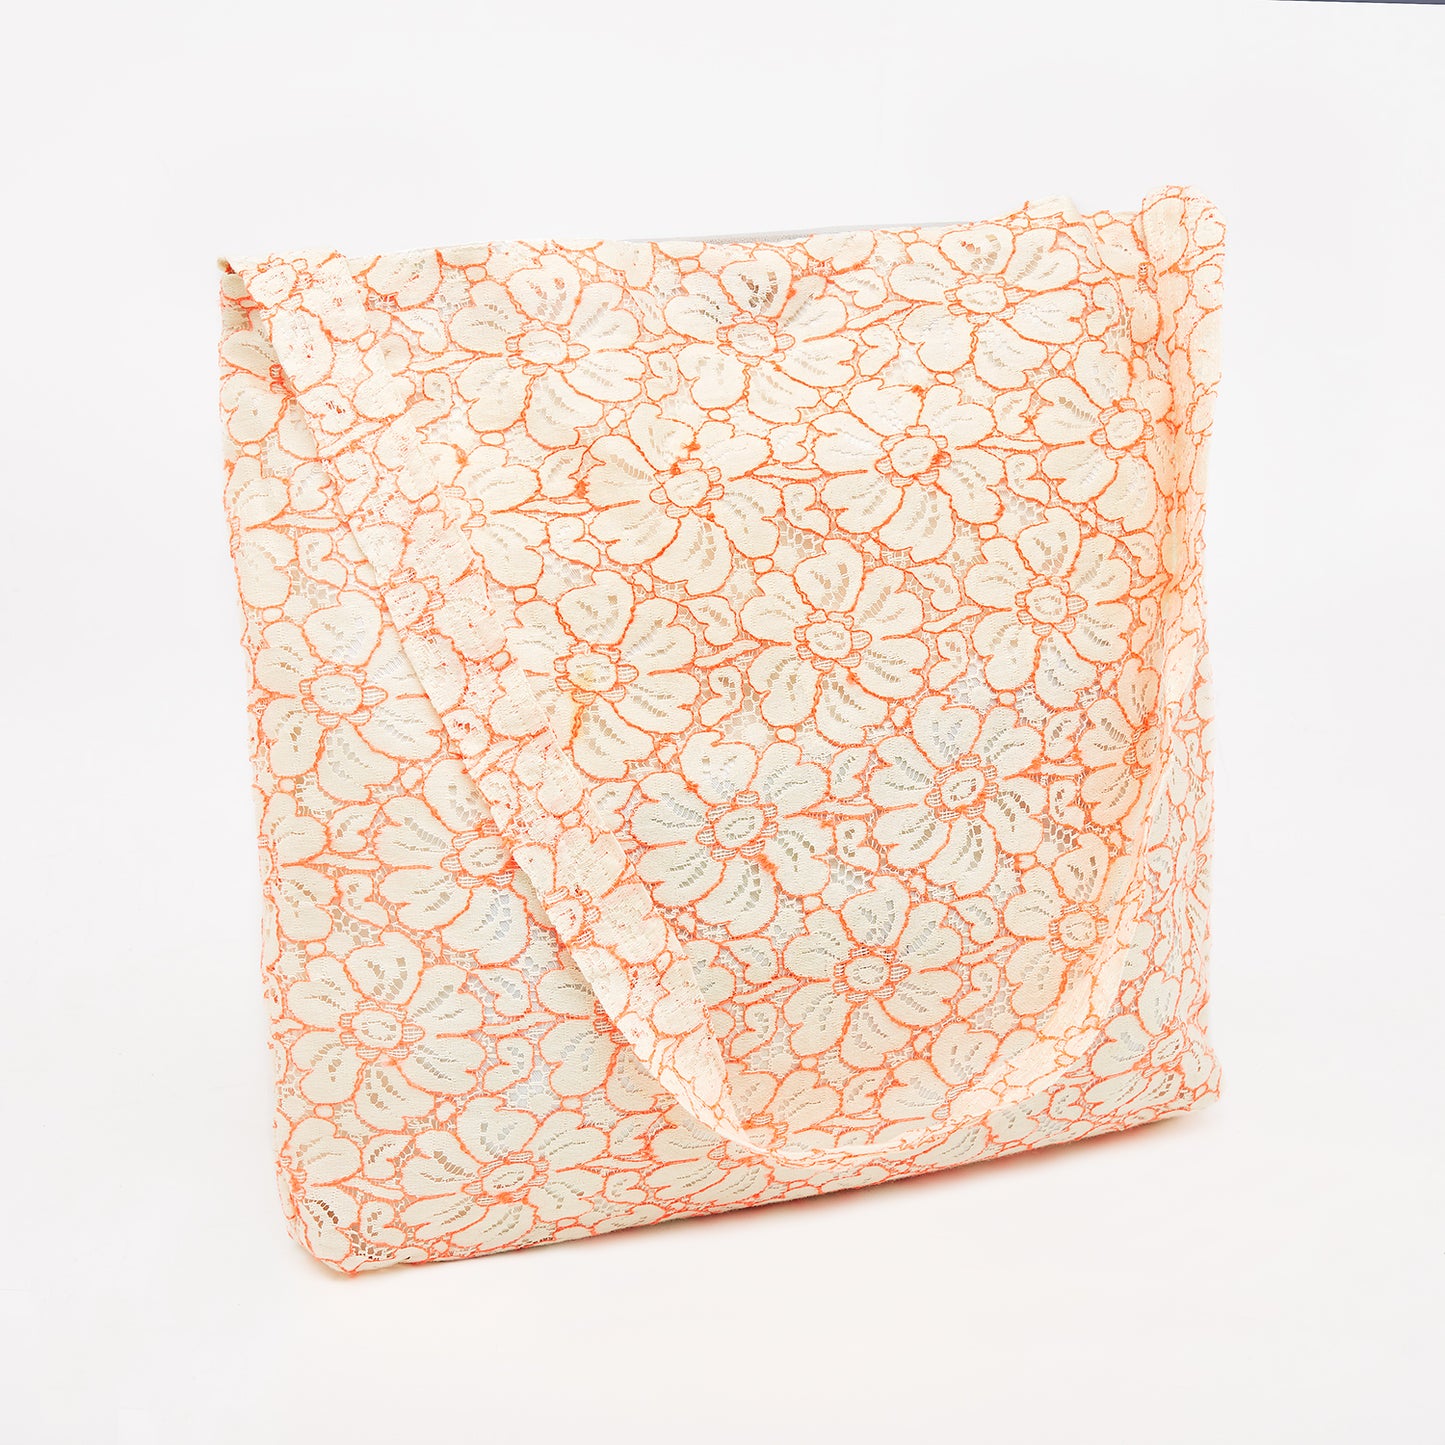 Flower Pattern on a Snow White - Fabric Bag on Super Sale!!!